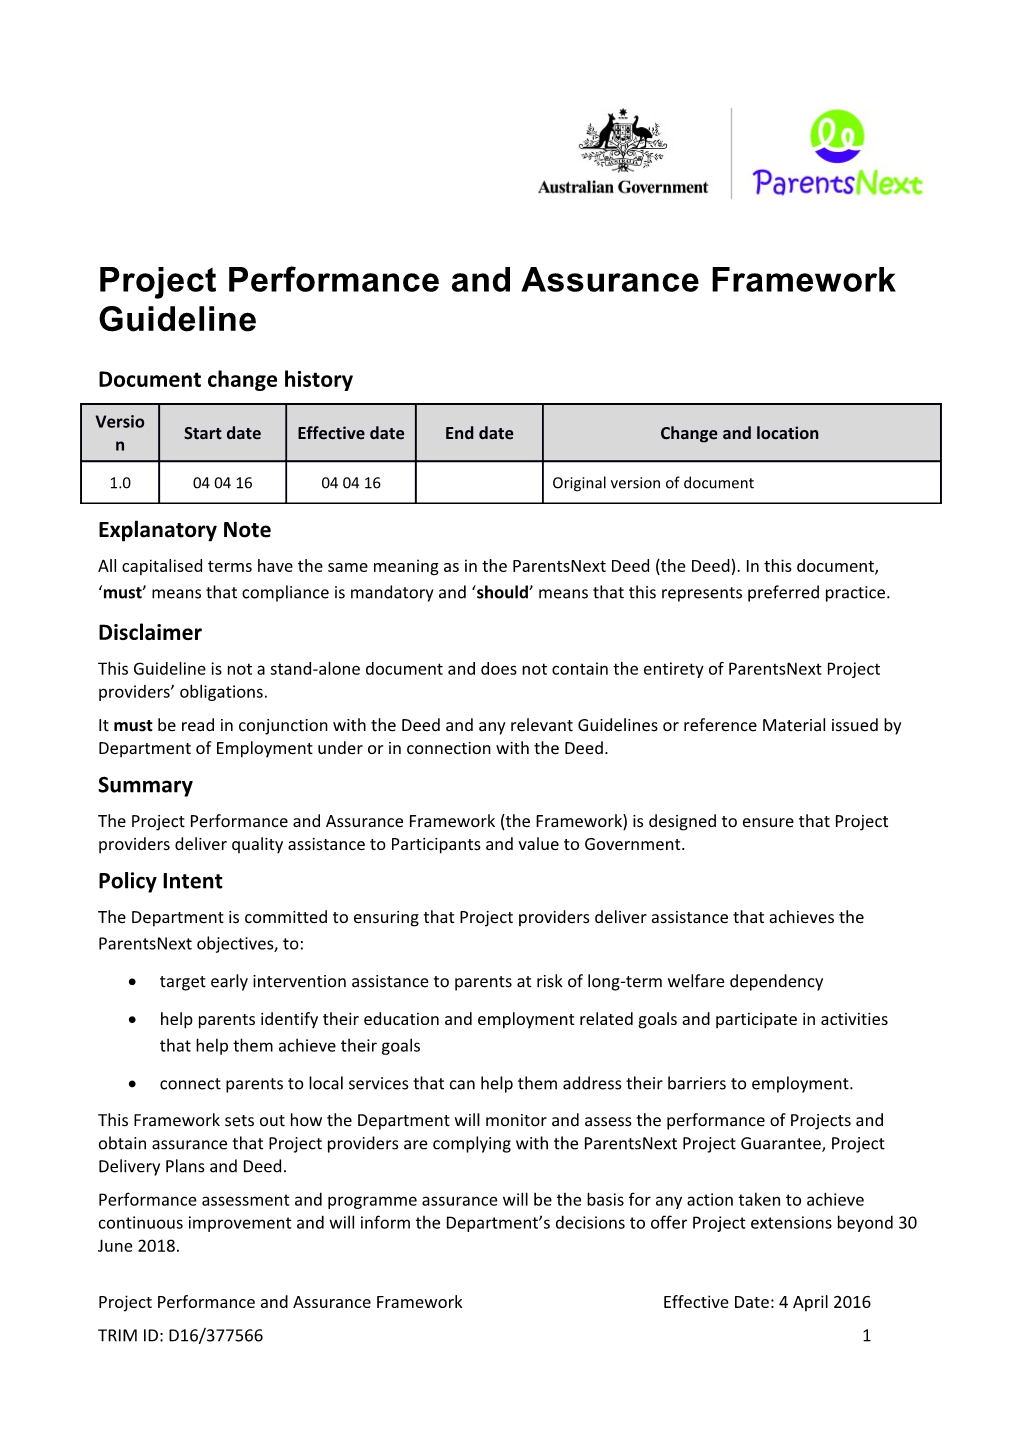 Project Performance and Assurance Framework Guideline